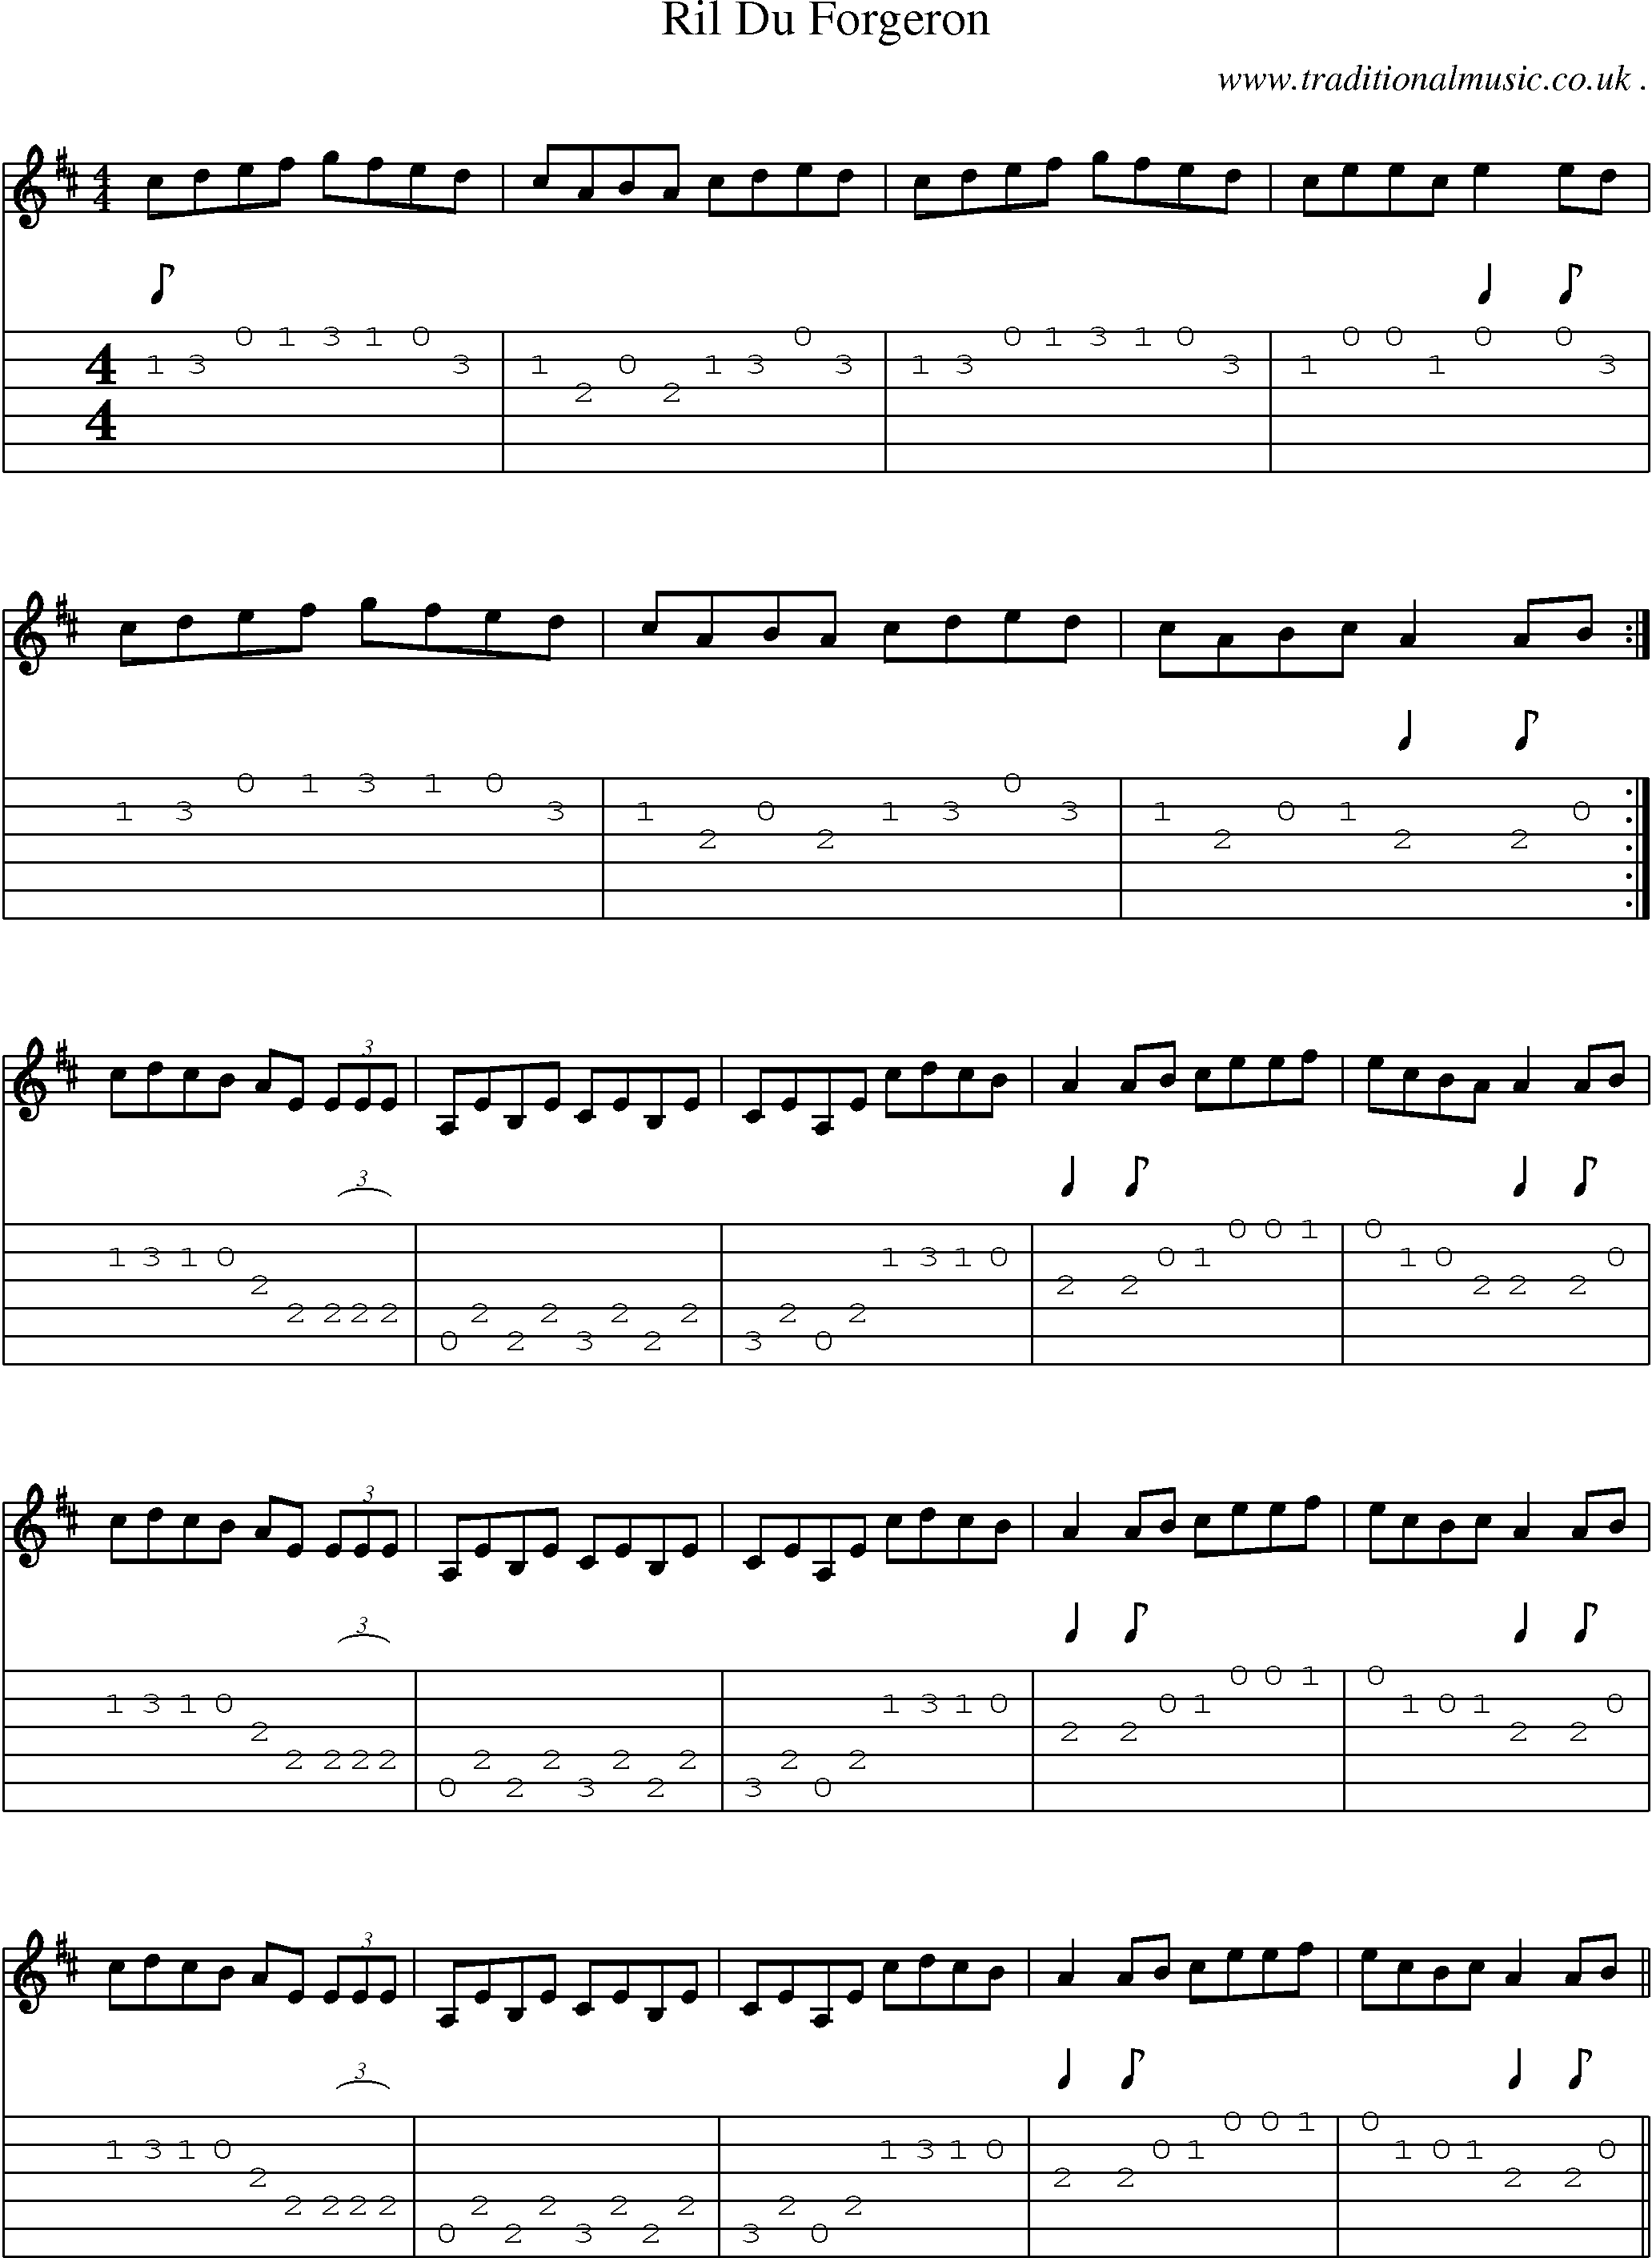 Sheet-Music and Guitar Tabs for Ril Du Forgeron